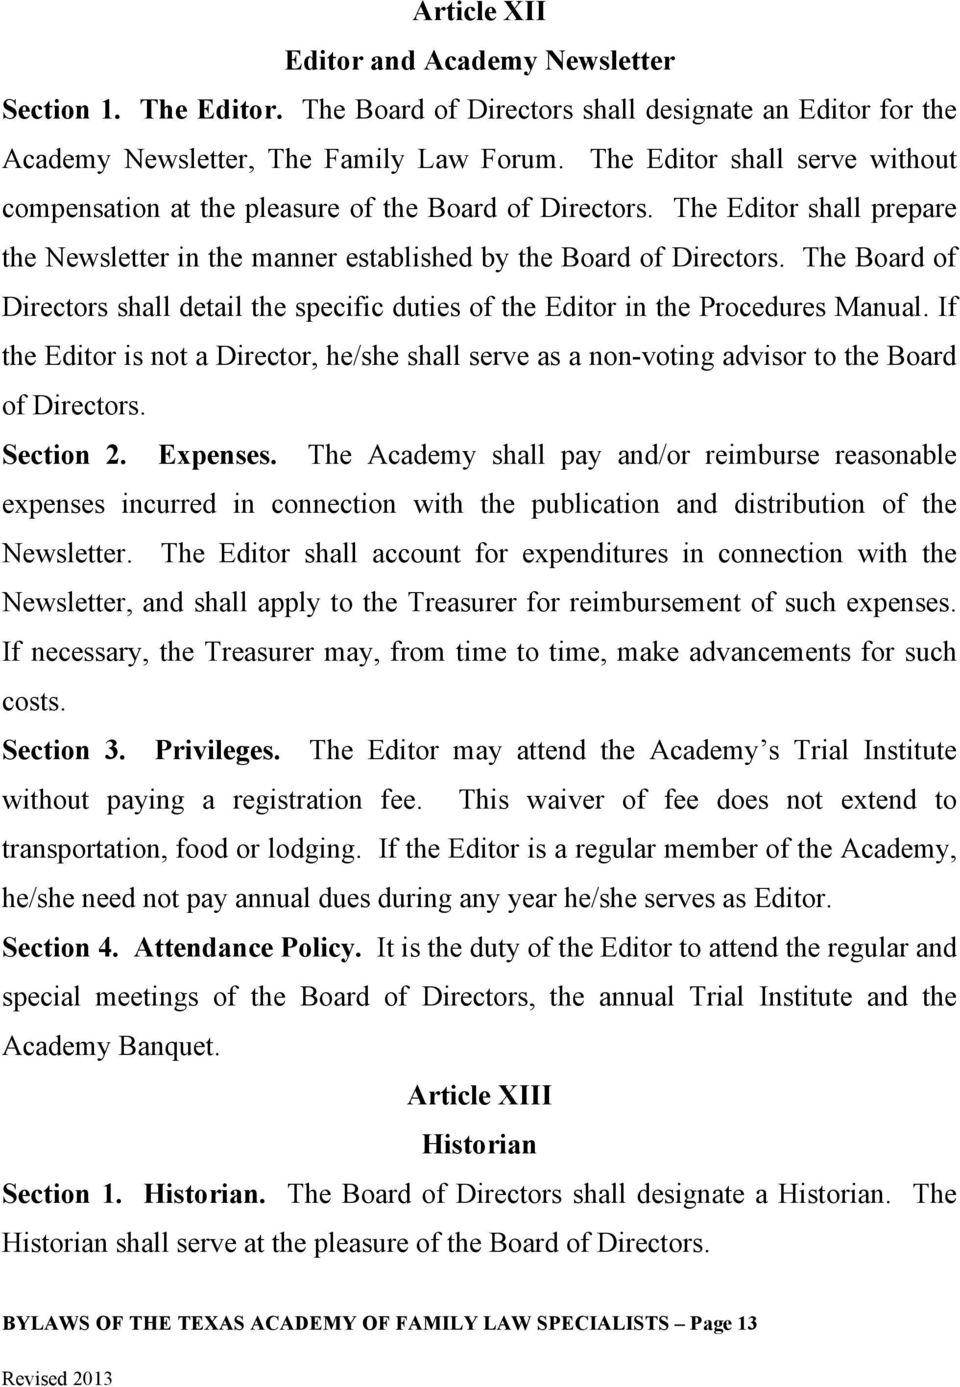 The Board of Directors shall detail the specific duties of the Editor in the Procedures Manual. If the Editor is not a Director, he/she shall serve as a non-voting advisor to the Board of Directors.